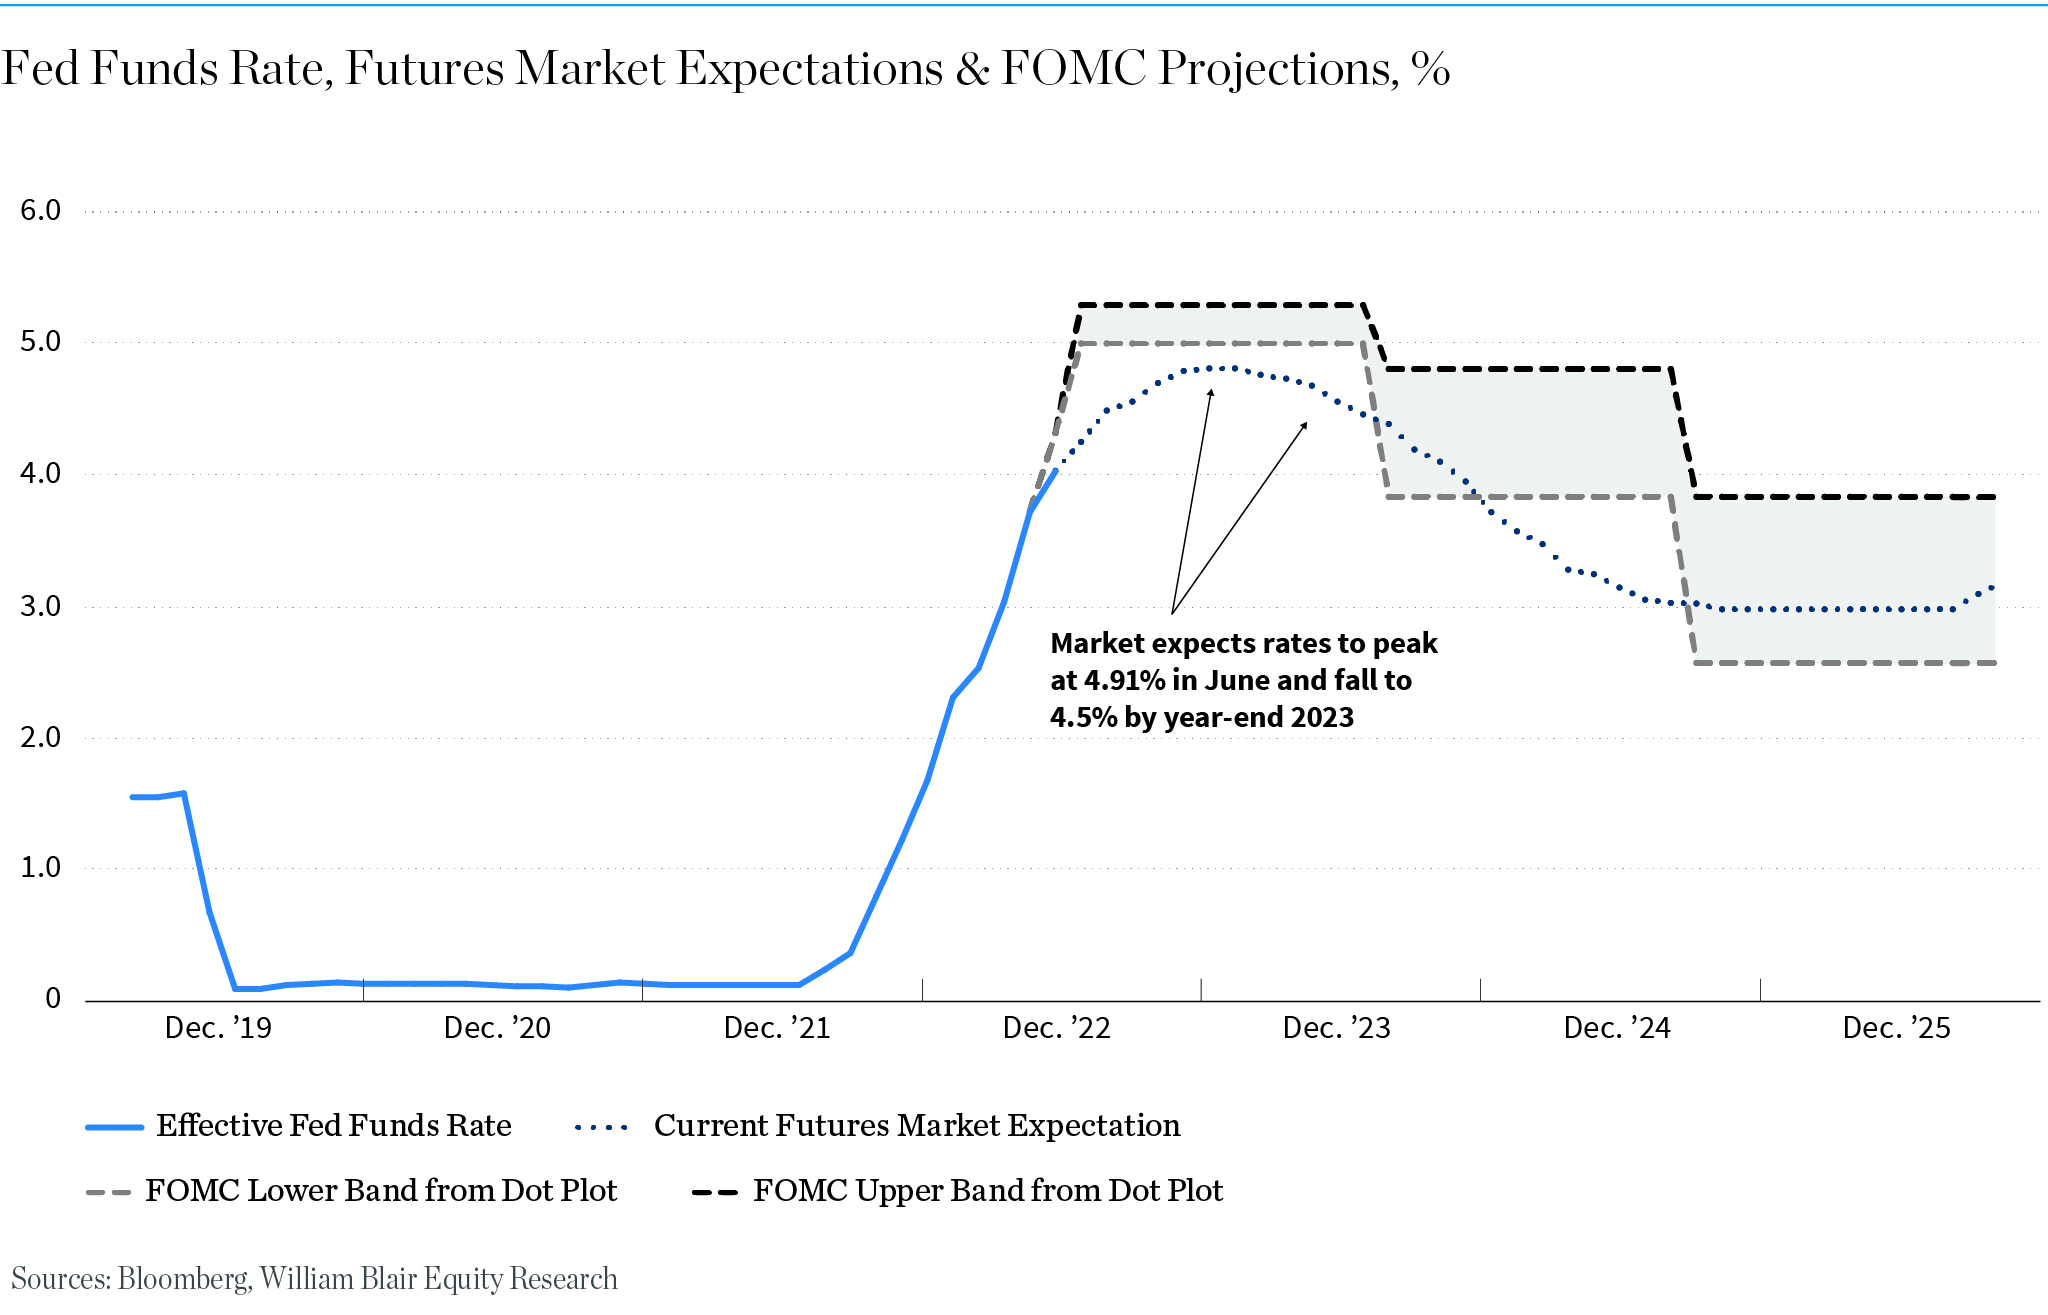 Fed Funds Rate, Futures Market Expectations & FOMC Projections